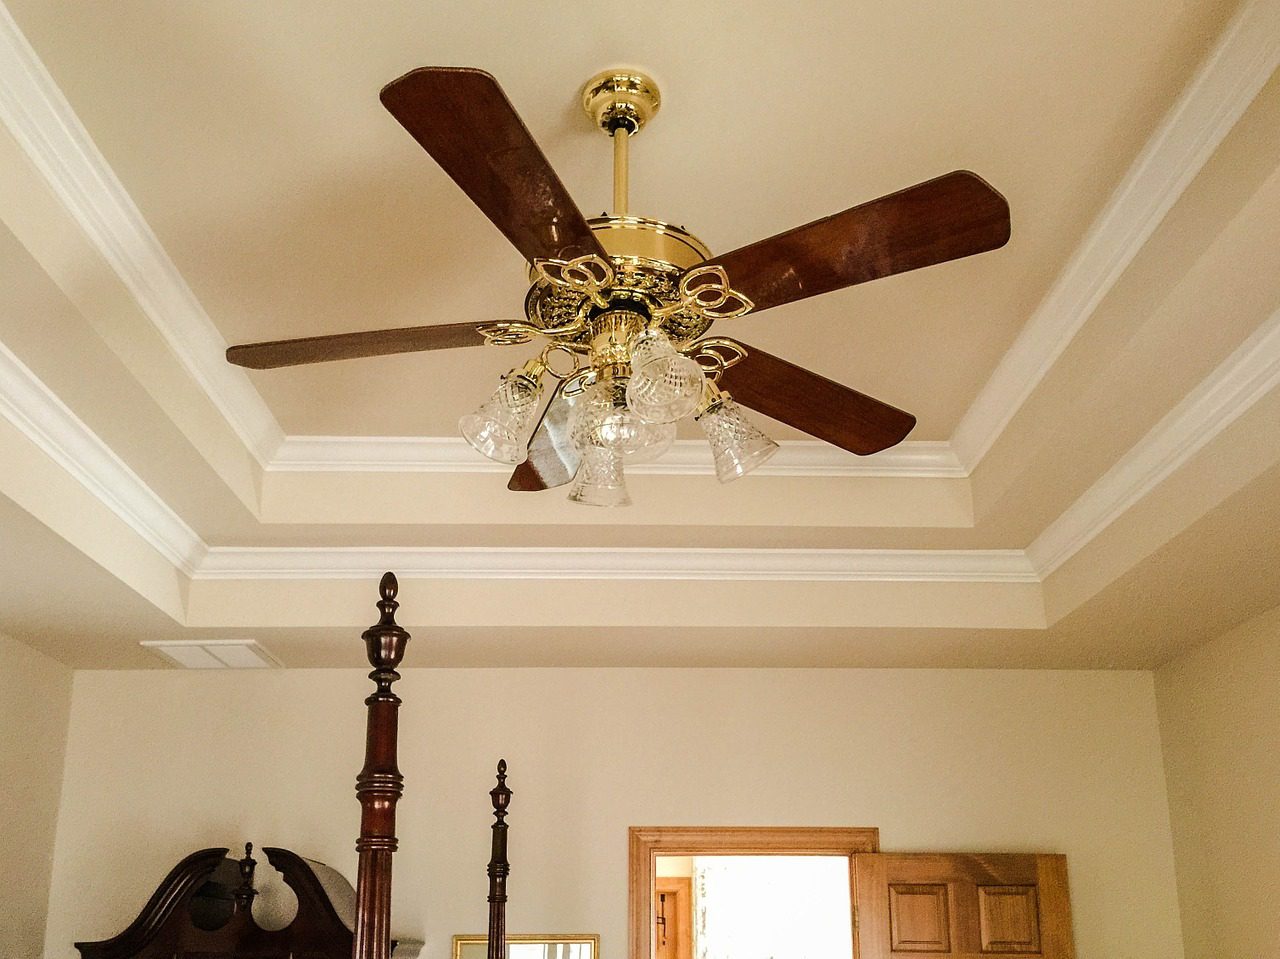 Use Fans to Keep Cool During Mild Fall Weather in Northern Virginia